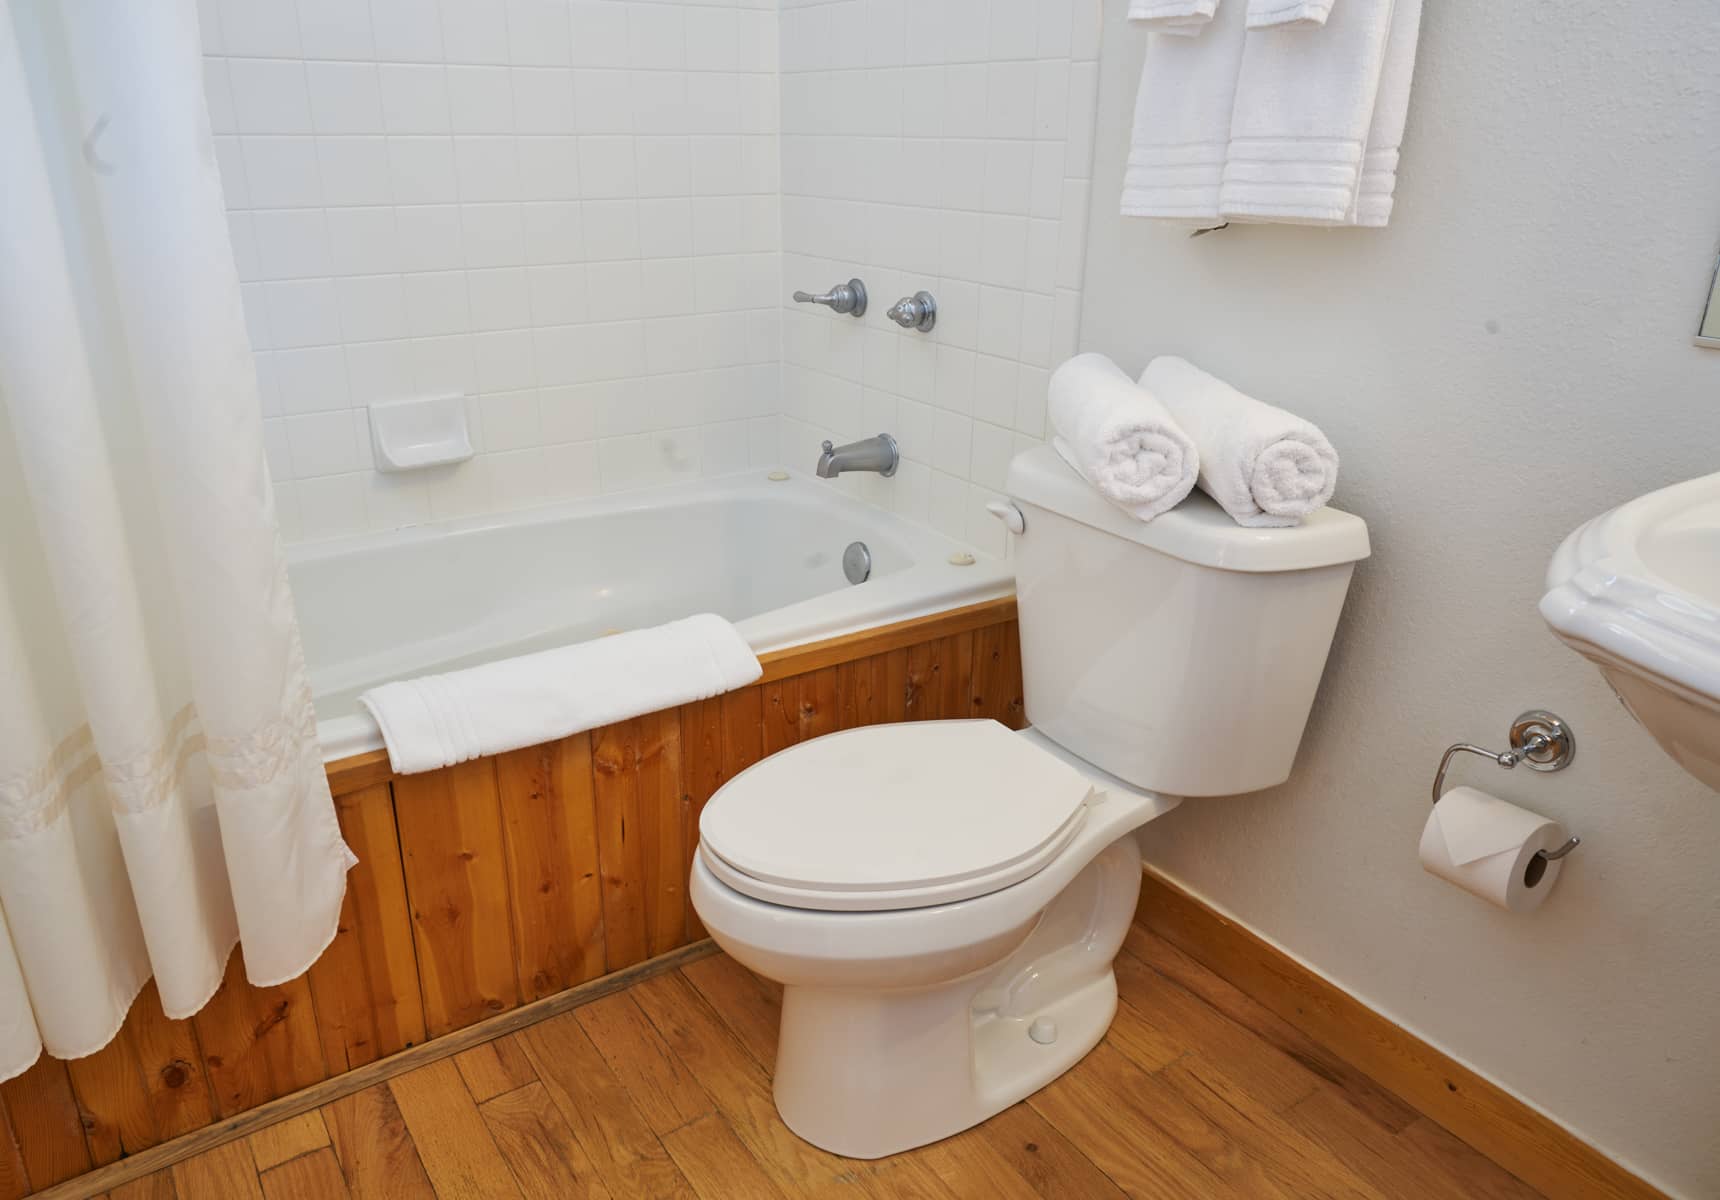 Bathroom with a jetted tub